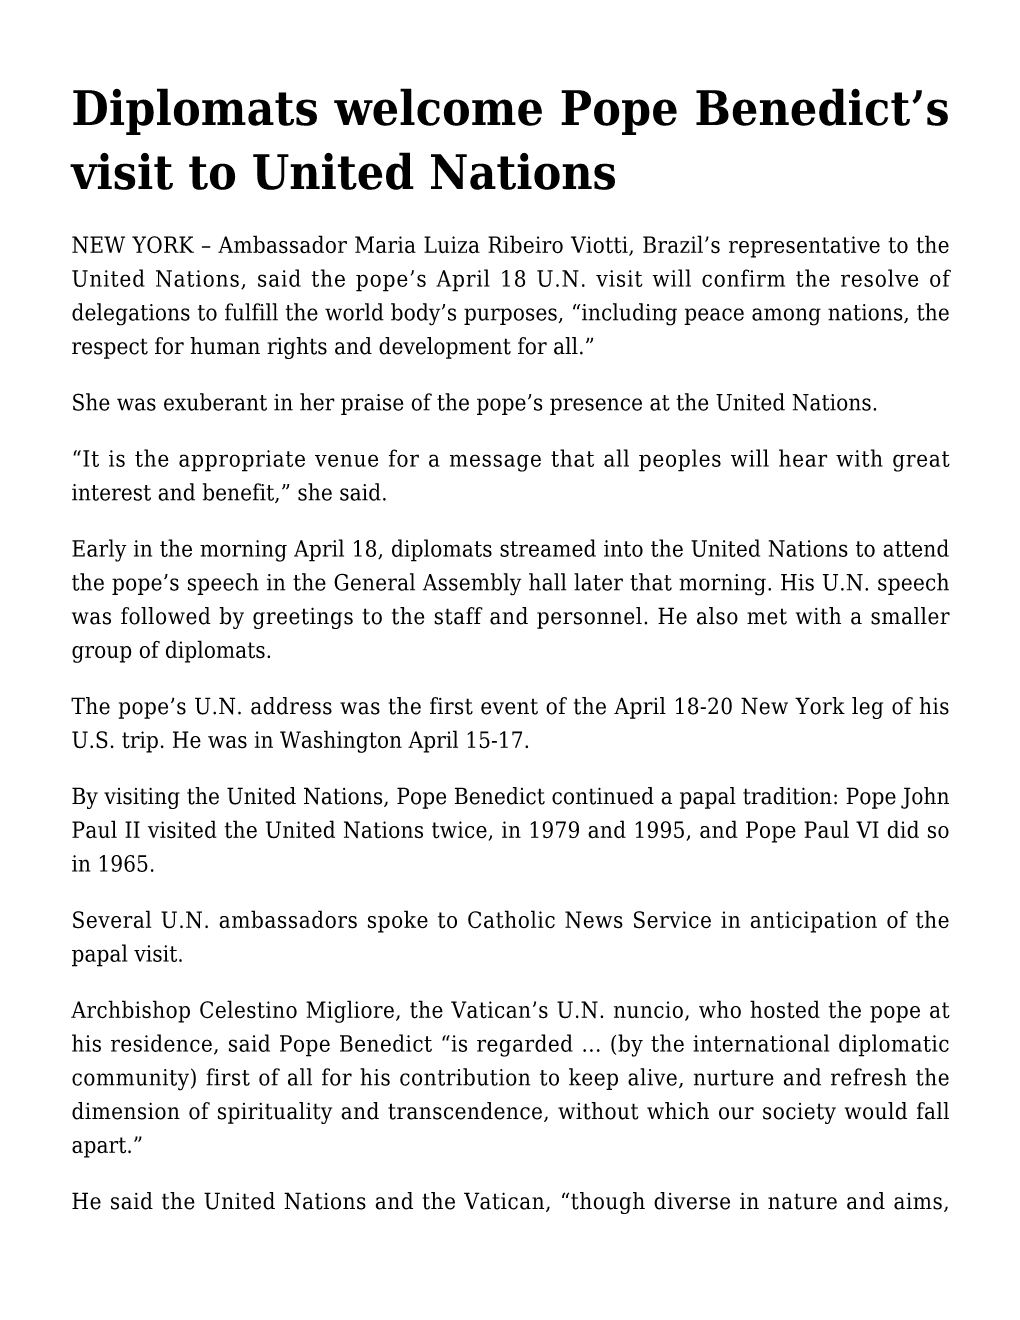 Diplomats Welcome Pope Benedict's Visit to United Nations